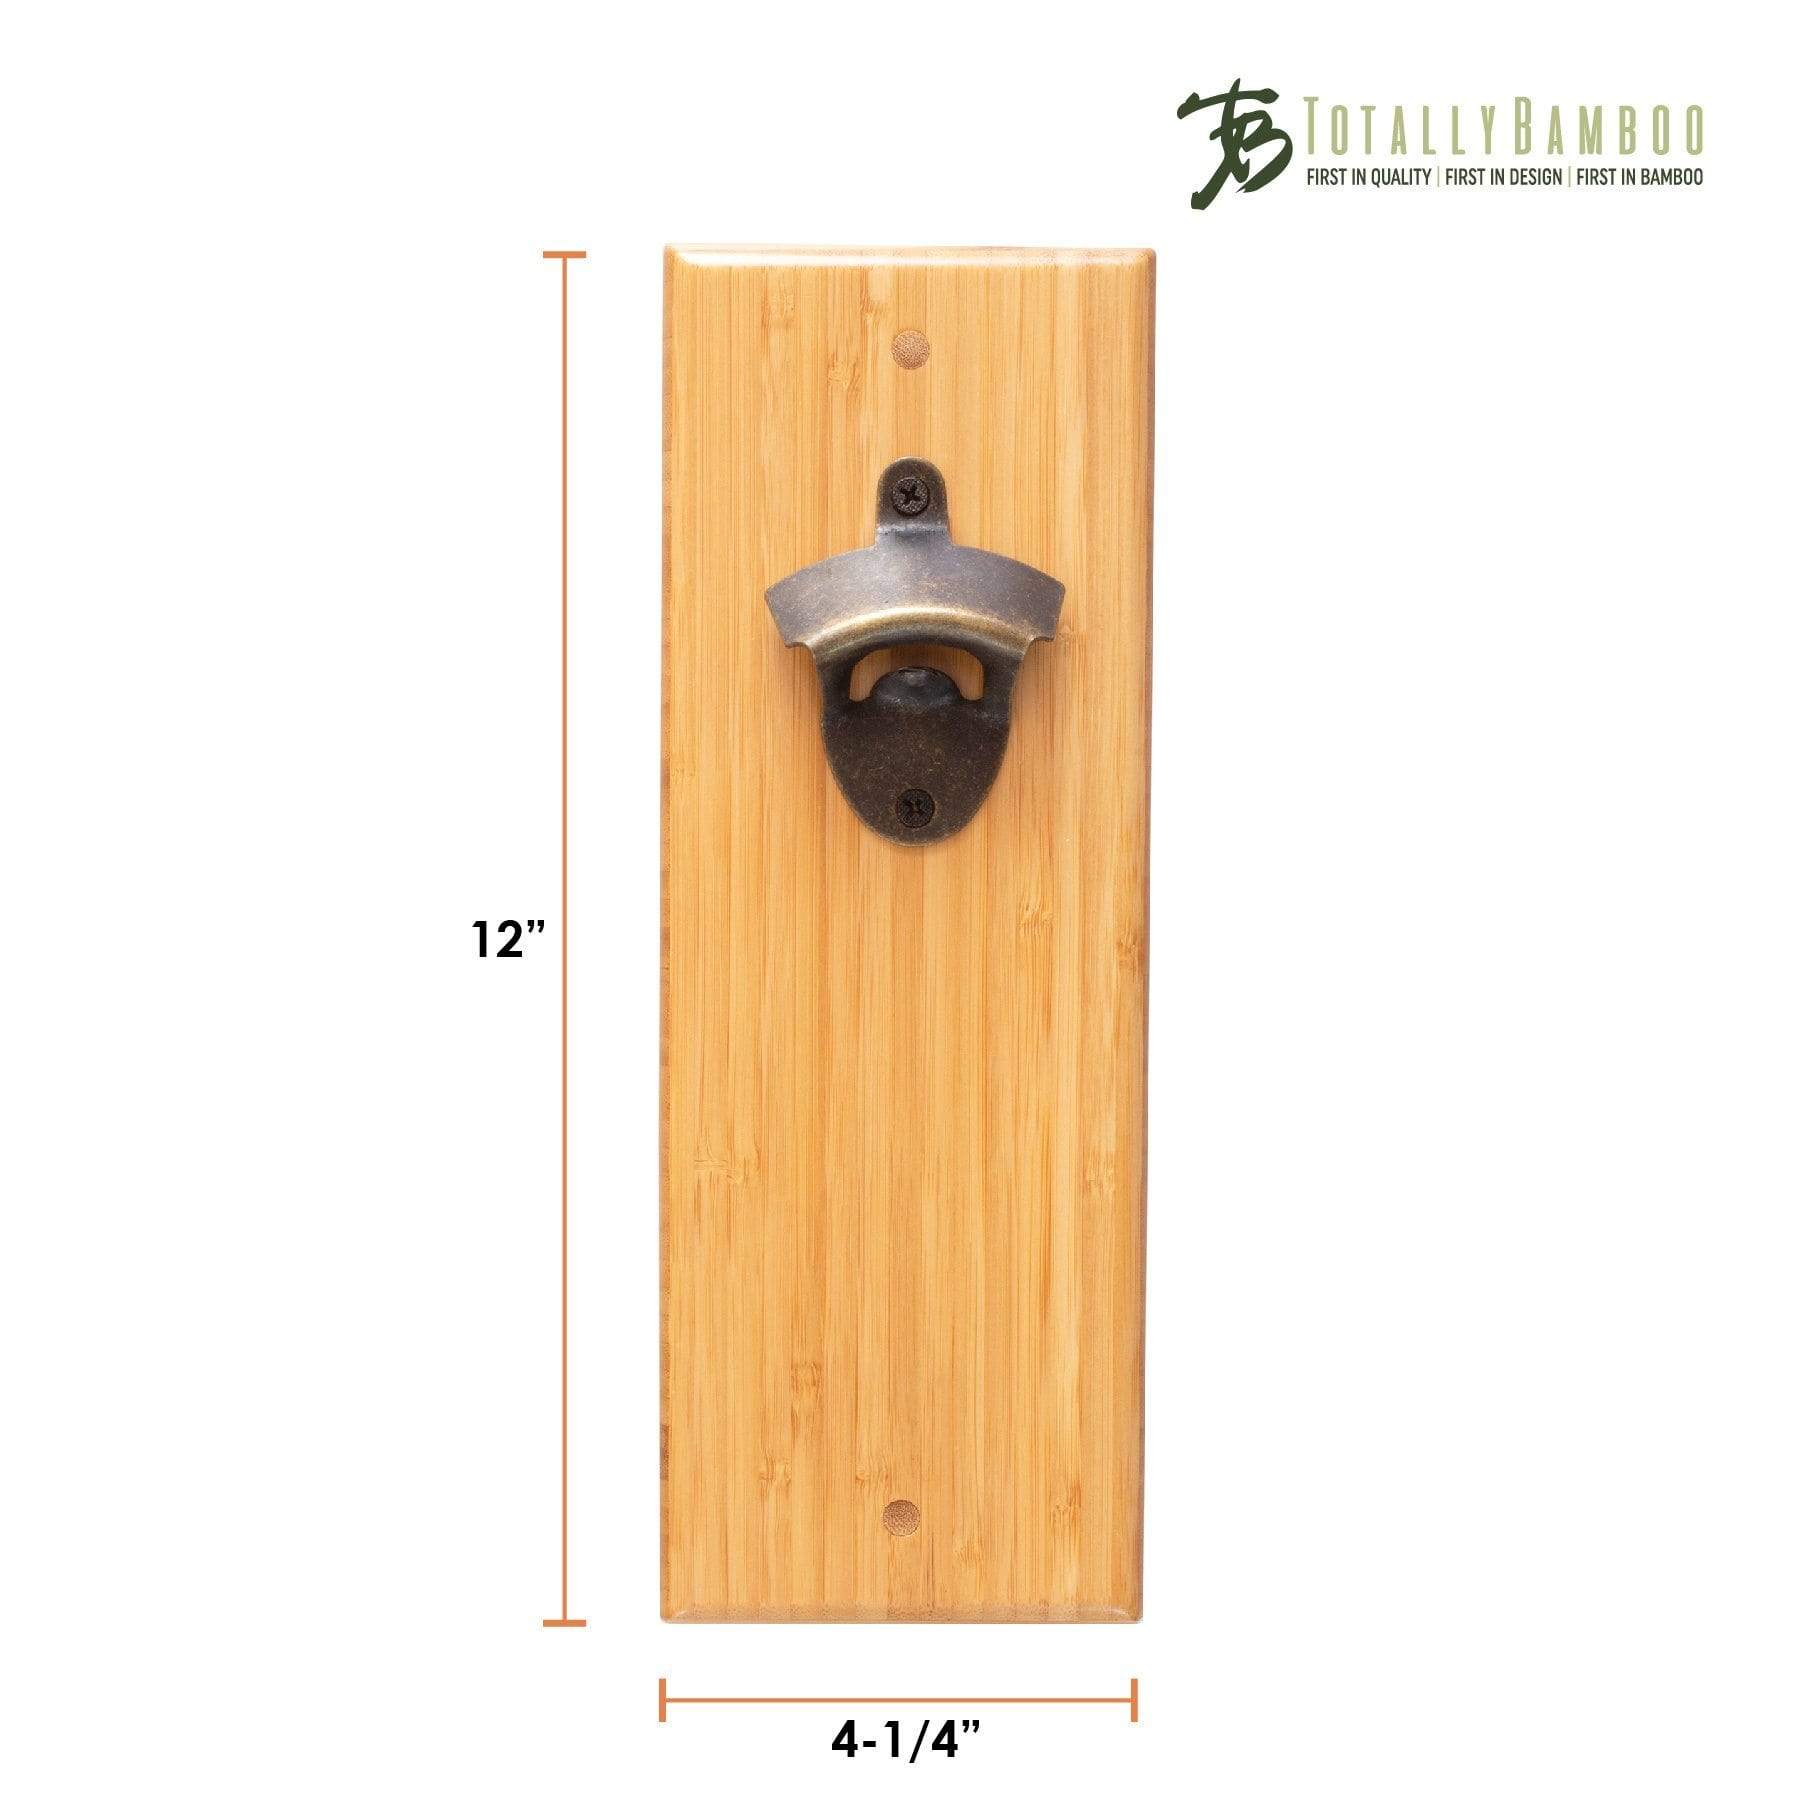 Totally Bamboo Wall Mounted Bottle Opener with Magnetic Cap Catcher